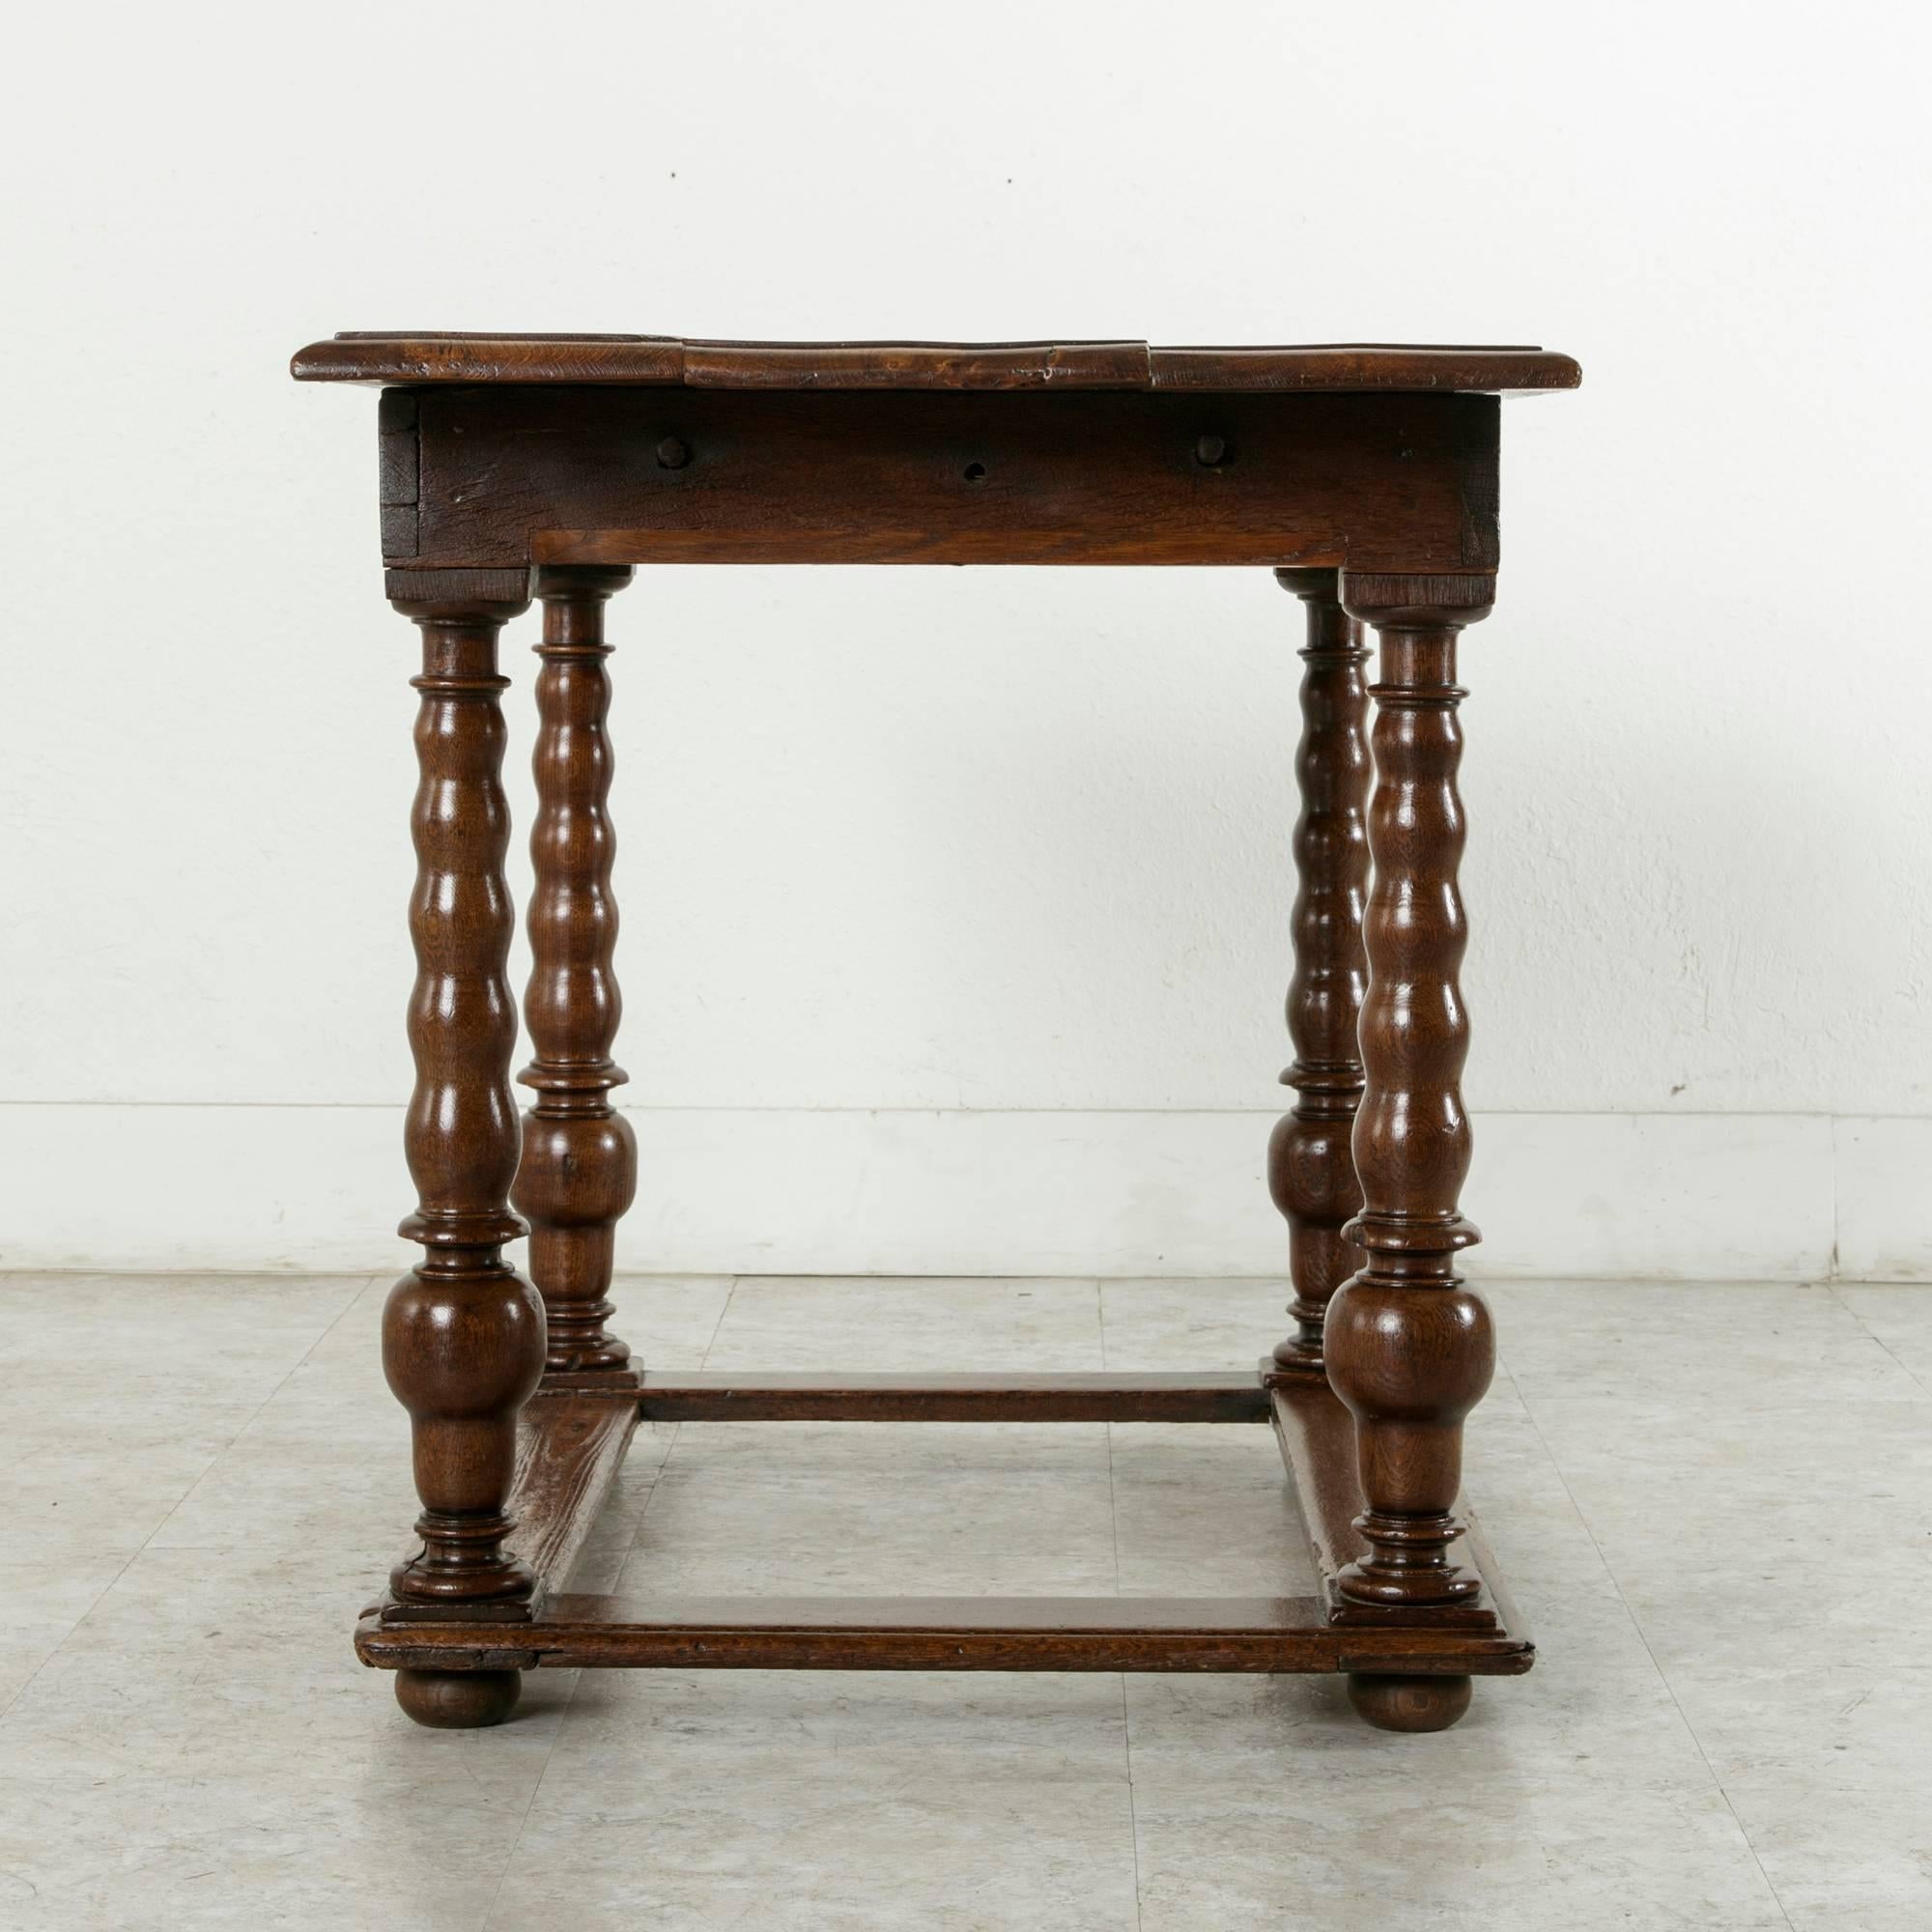 Iron 17th Century Louis XIII Period Oak Table with Spooled Legs and Single Drawer